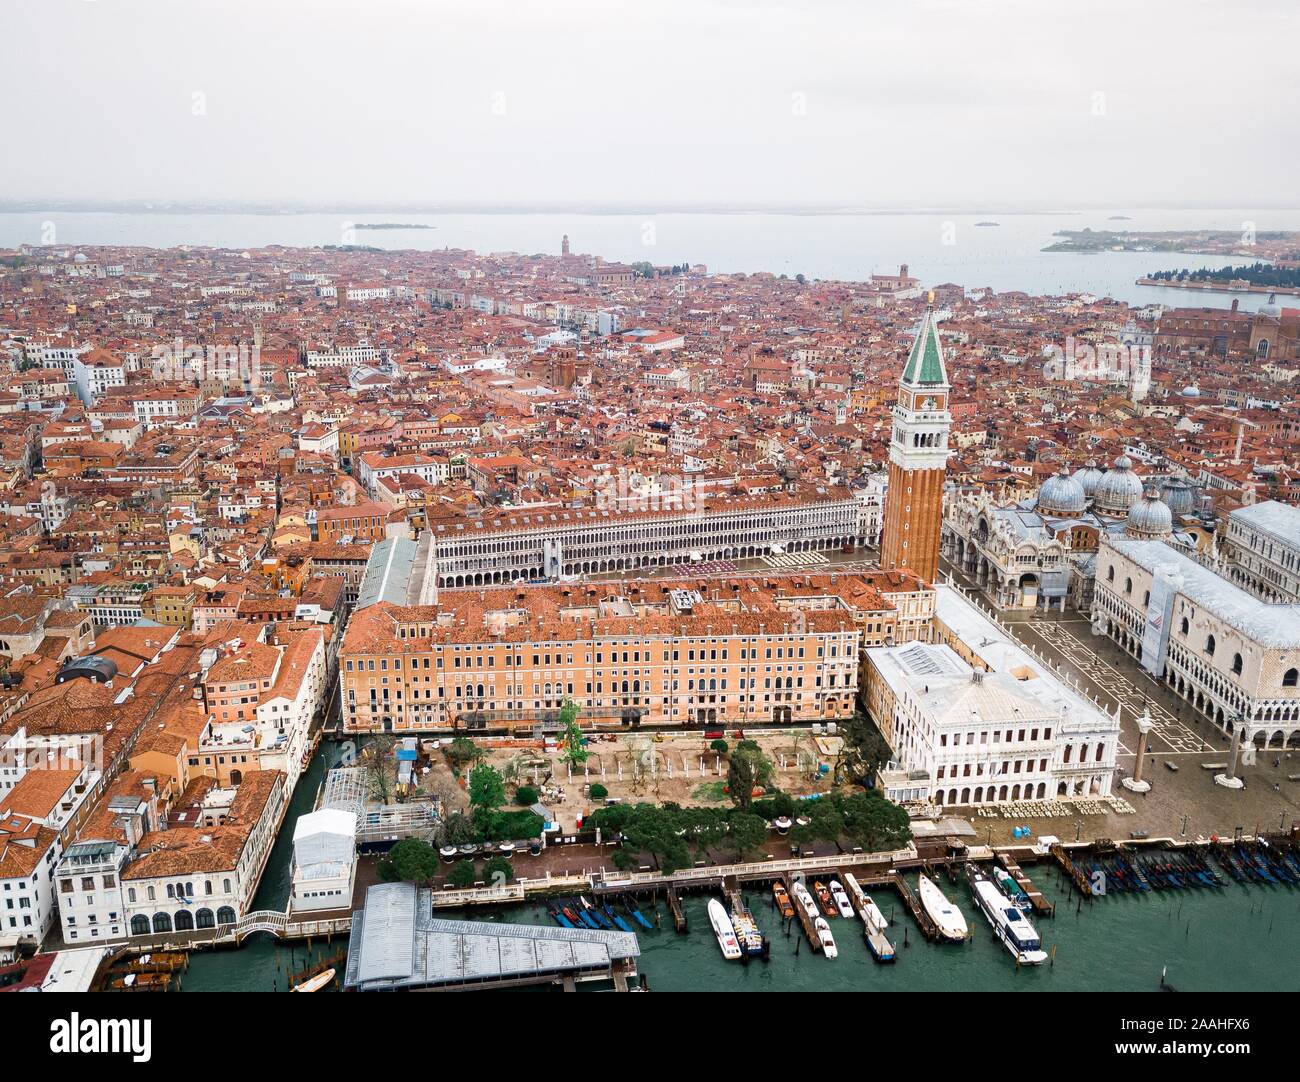 Piazza San Marco with Campanile, Basilica San Marco and Doge's Palace, aerial view, Venice, Veneto, Italy Stock Photo